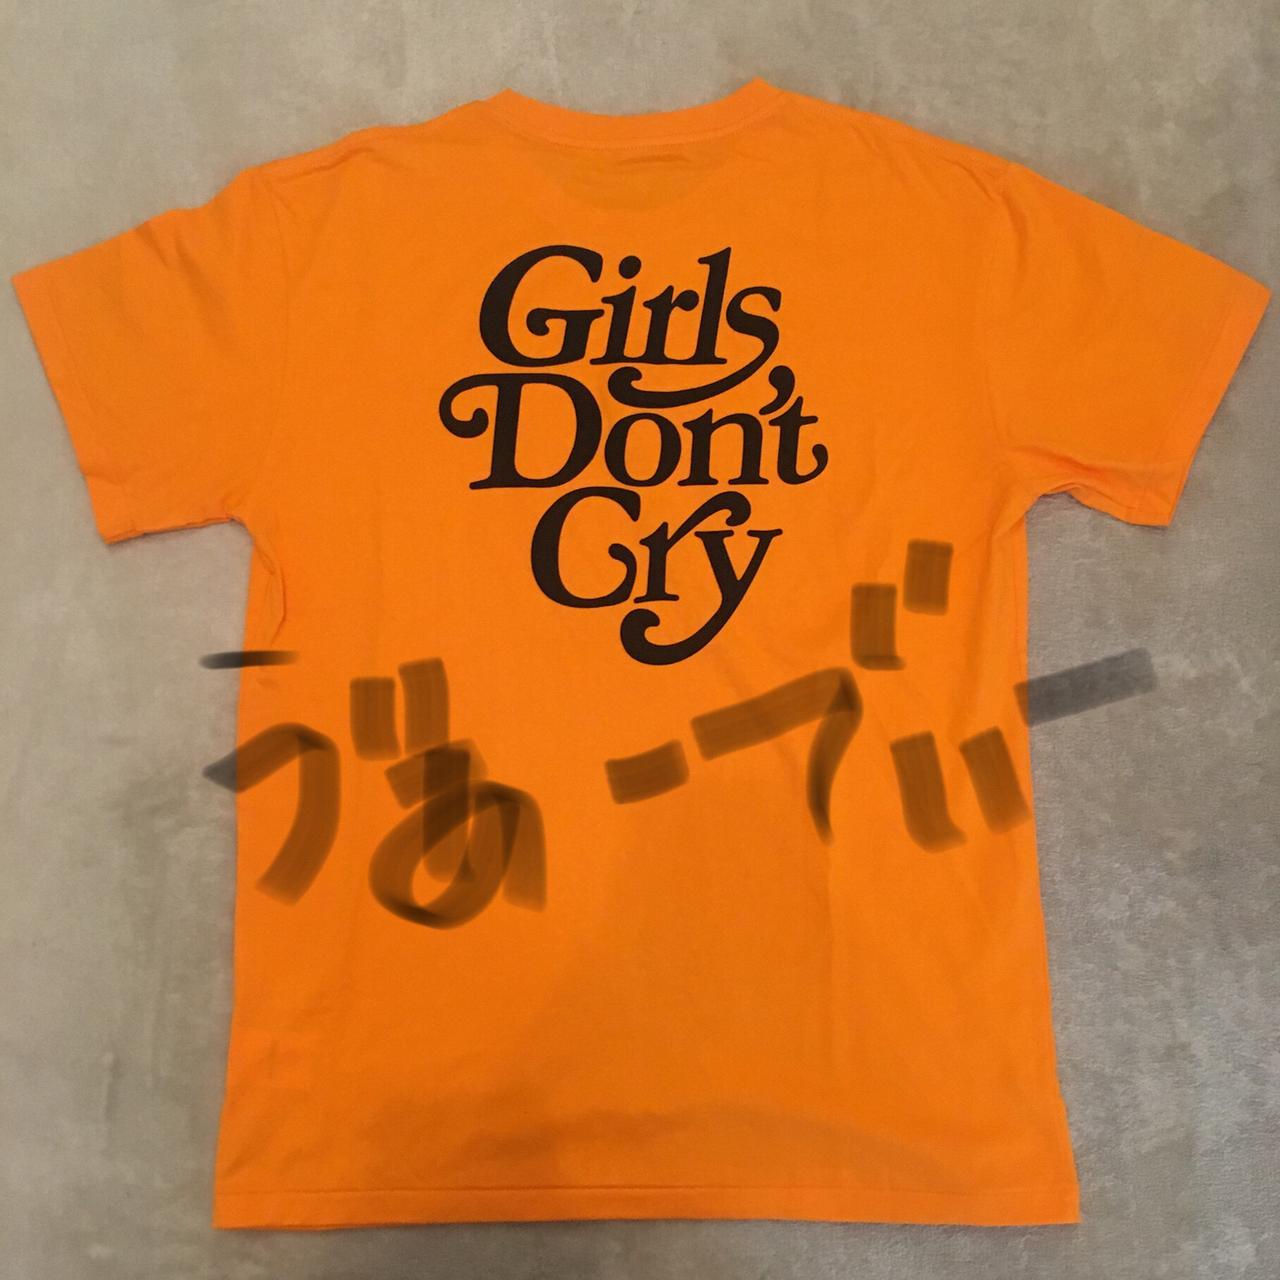 Girls Don’t Cry x Readymade Tee, size L, Color...